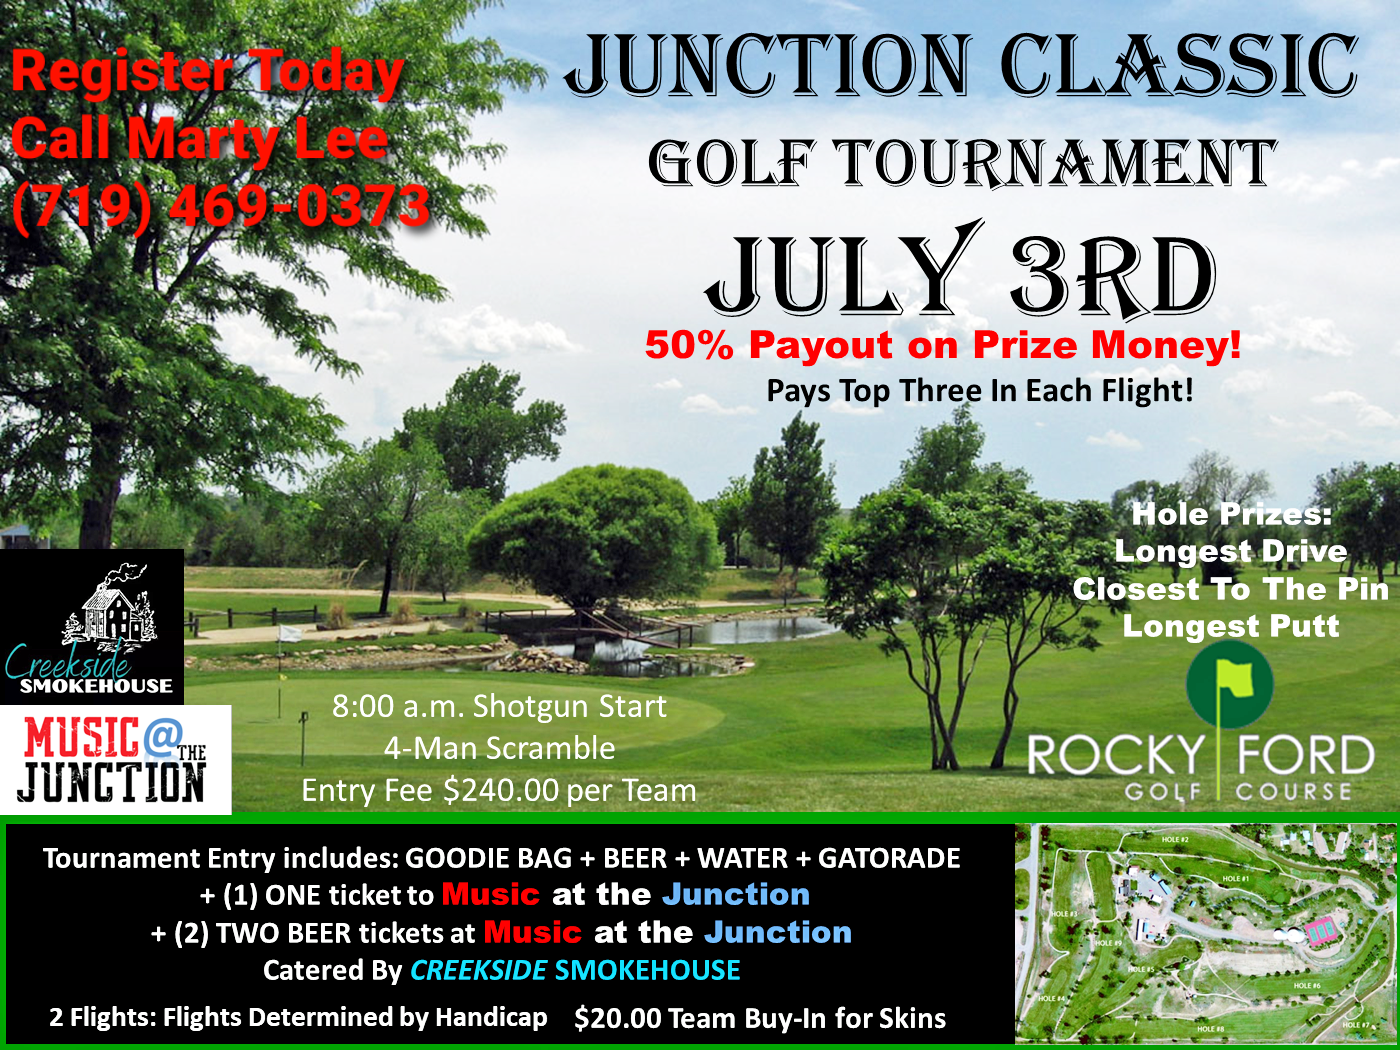 Junction Classic Golf Tournament Flyer SECO News seconews.org